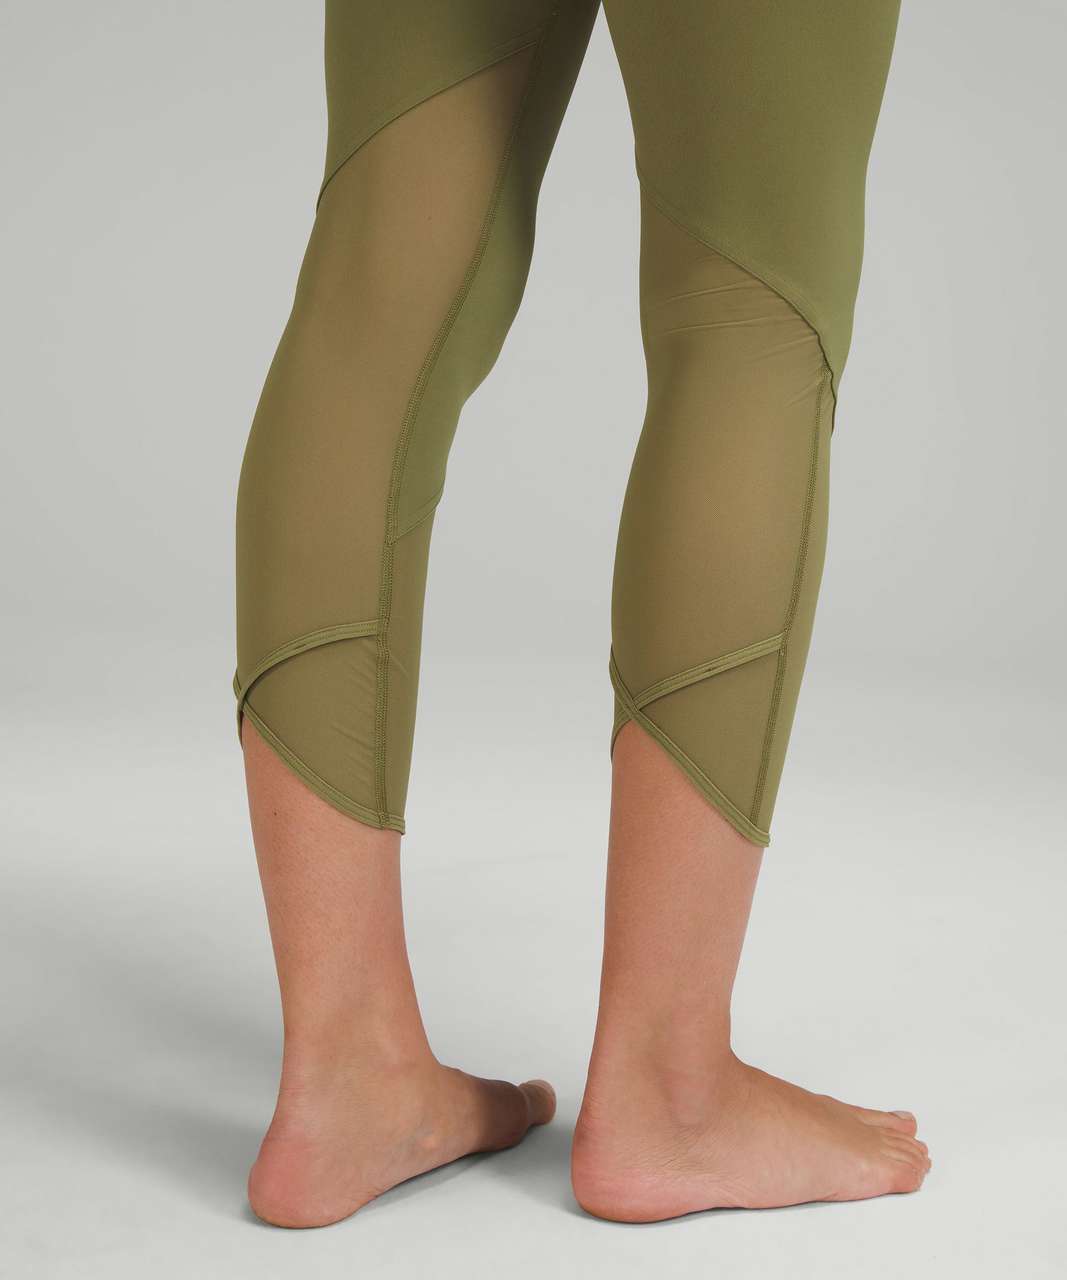 Nulu and Crisscross mesh stirrup tight in black and bronze green